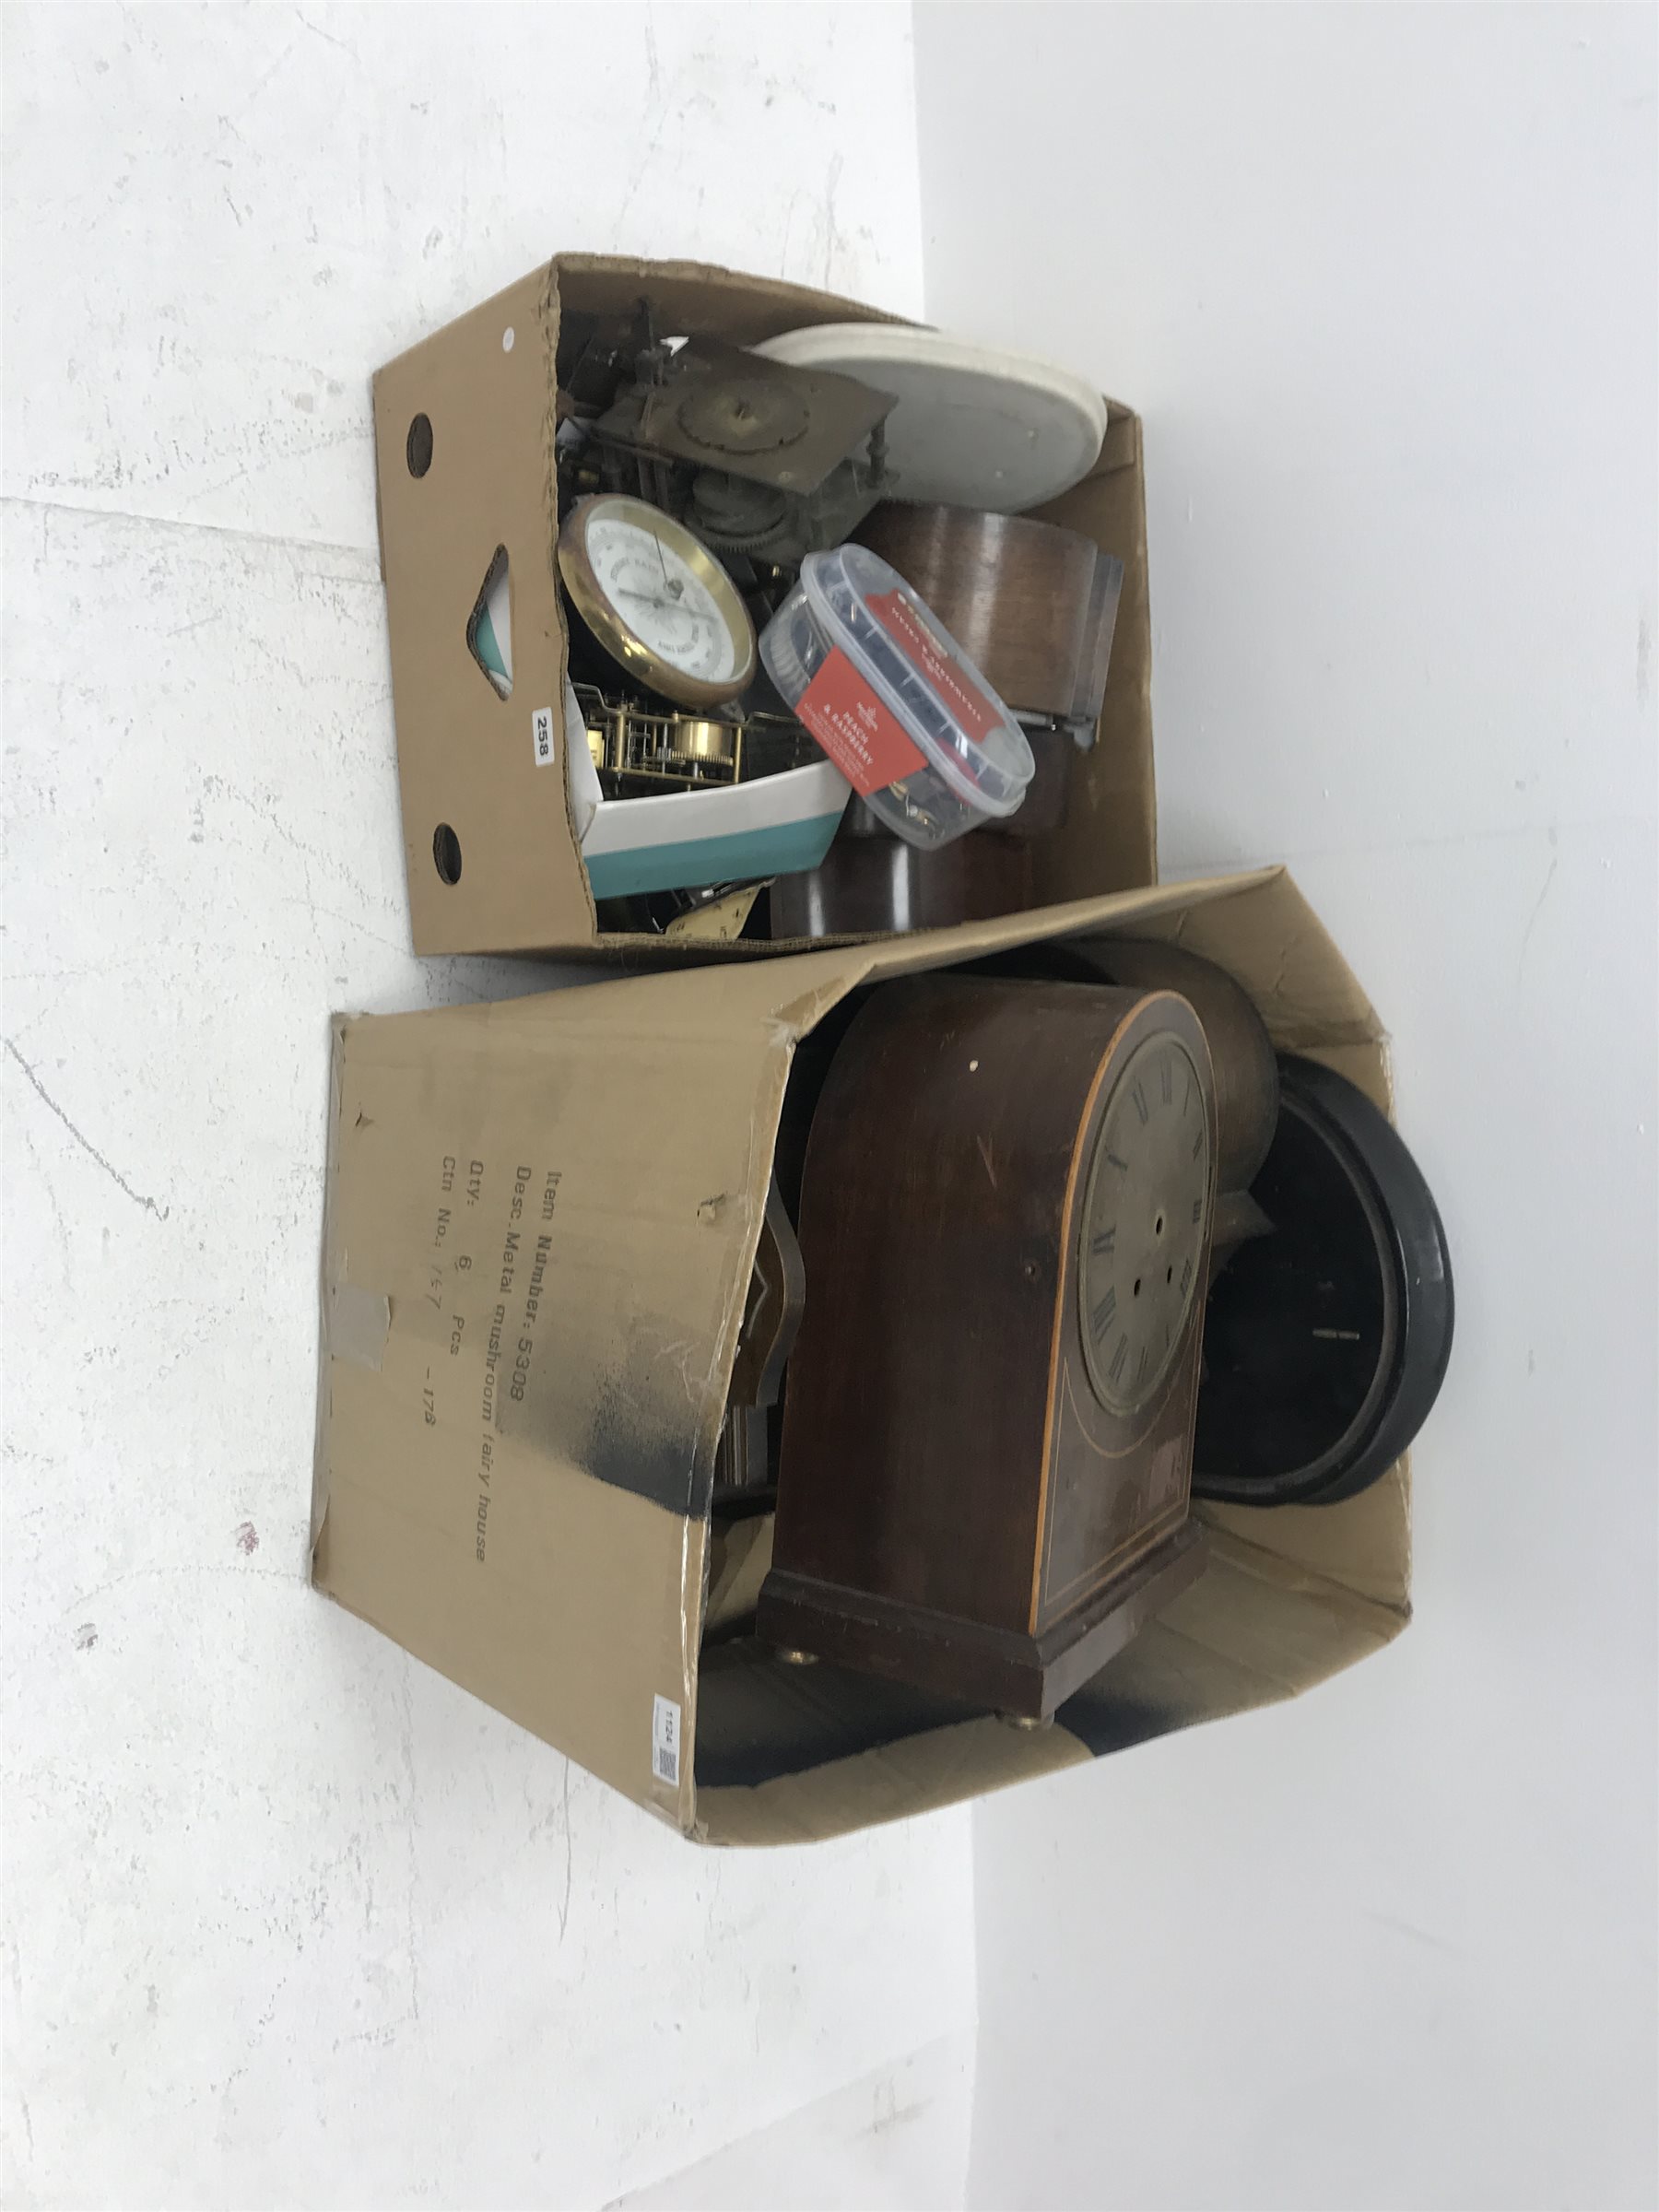 Collection of clock and watch parts - various cases some with movement